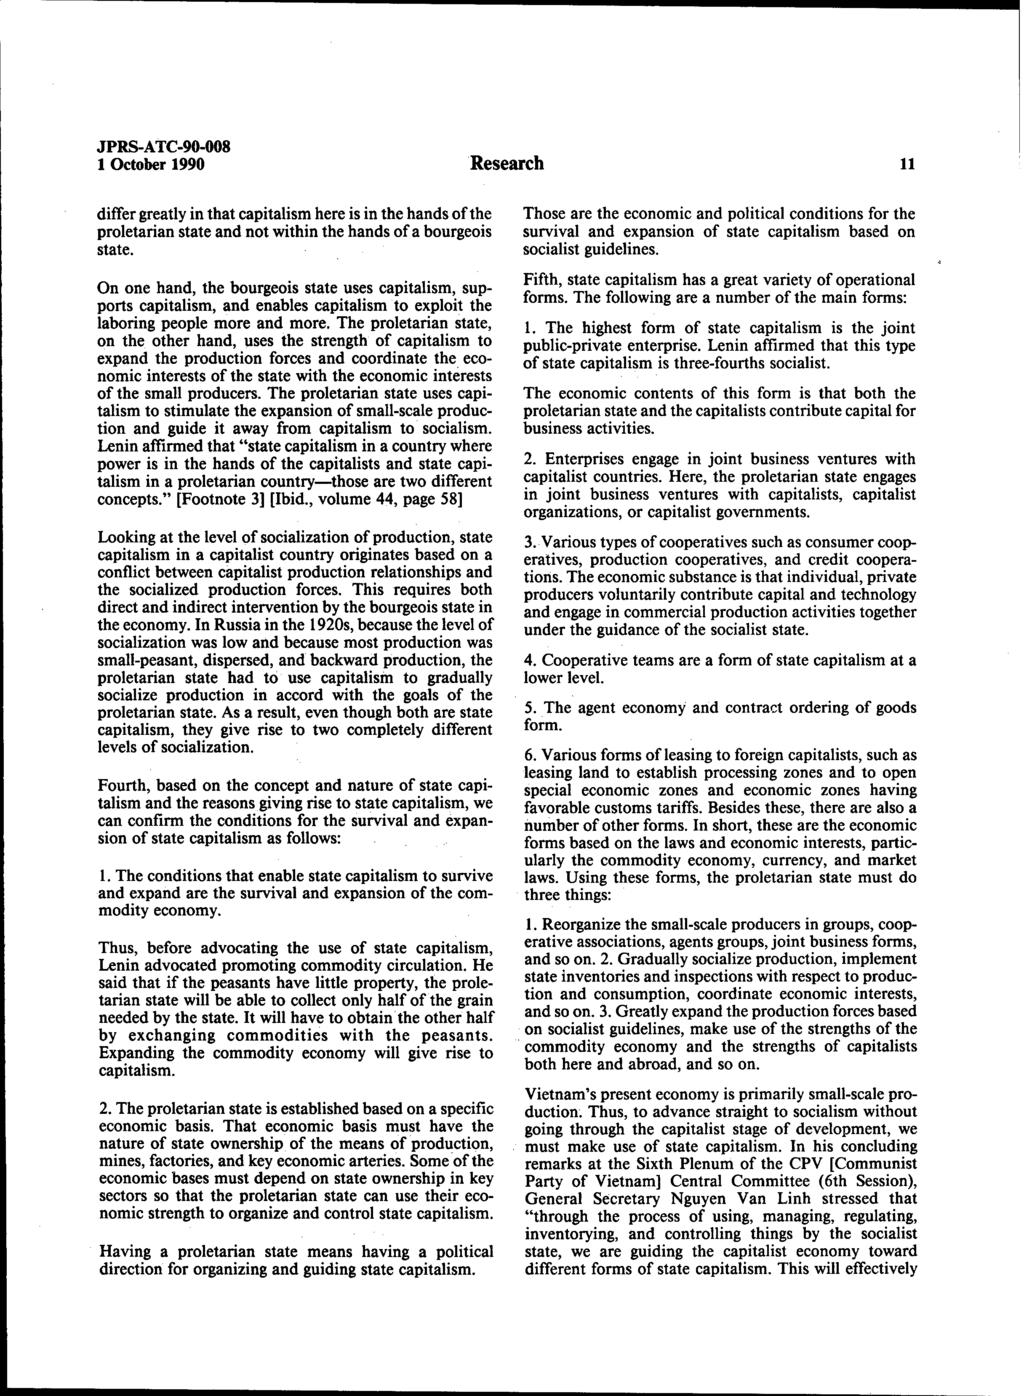 1 October 1990 Research 11 differ greatly in that capitalism here is in the hands of the proletarian state and not within the hands of a bourgeois state.